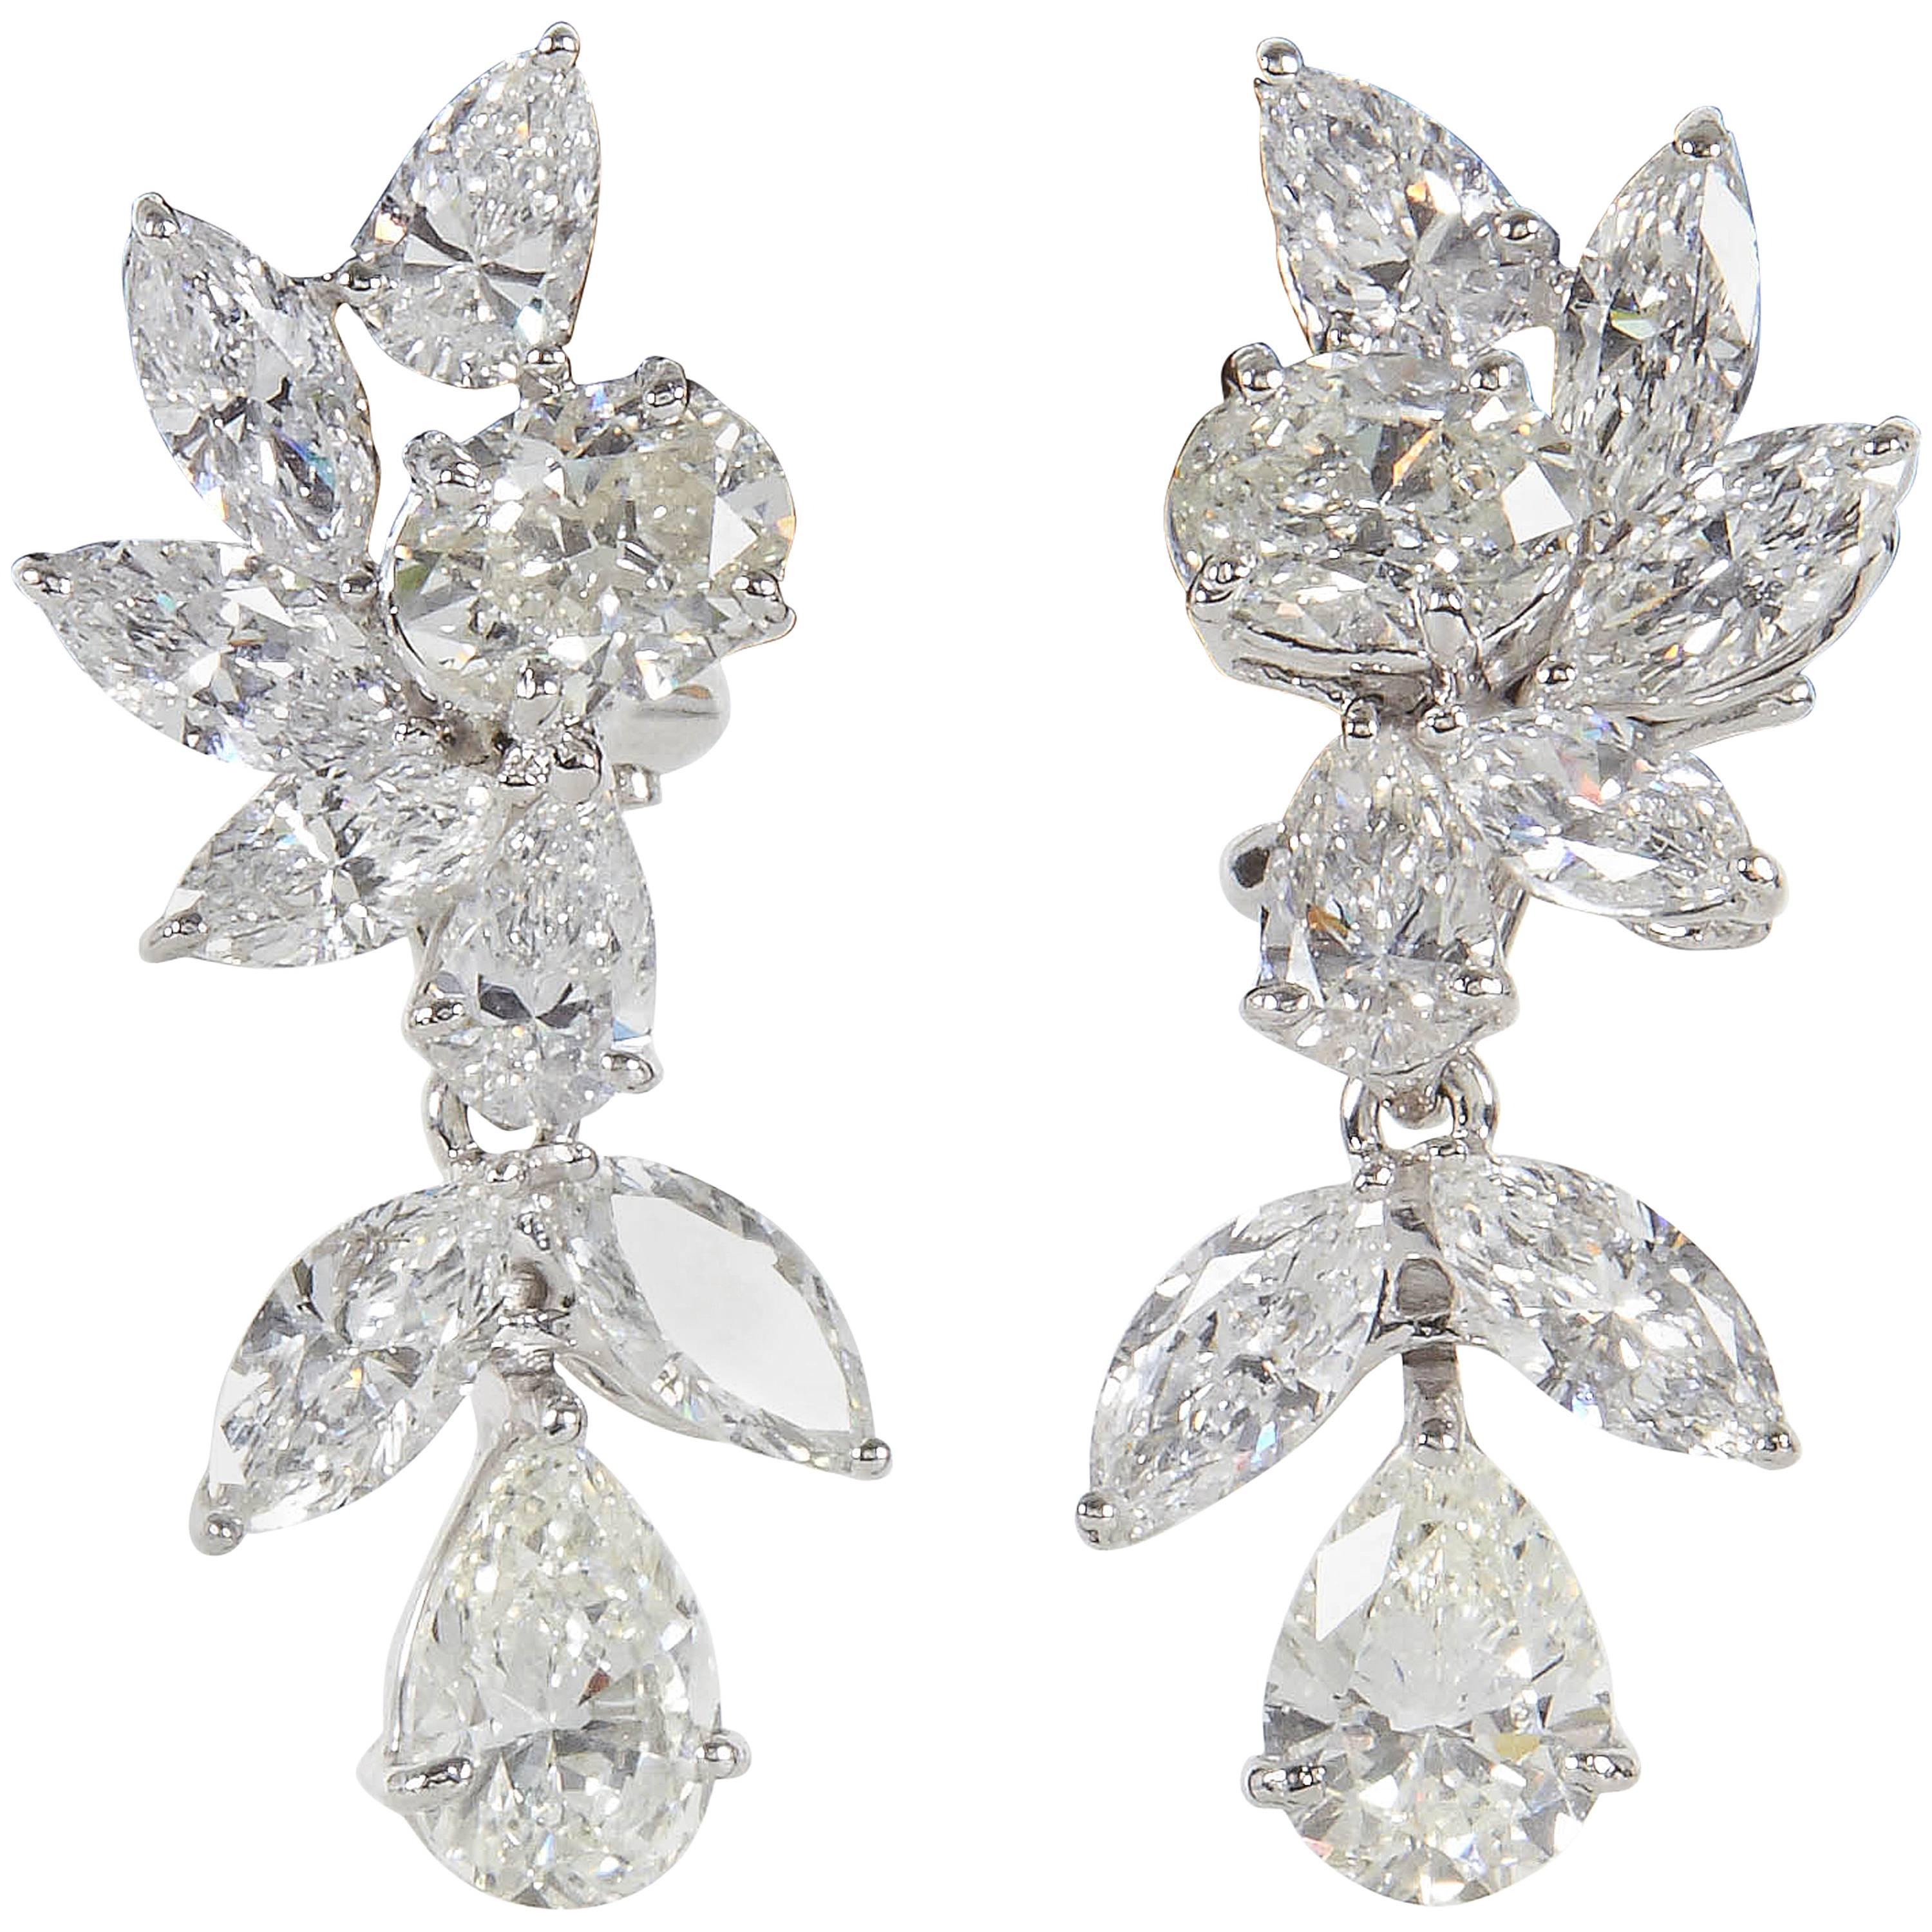 Elegant Diamond Platinum Cluster Earrings with Removable Drops